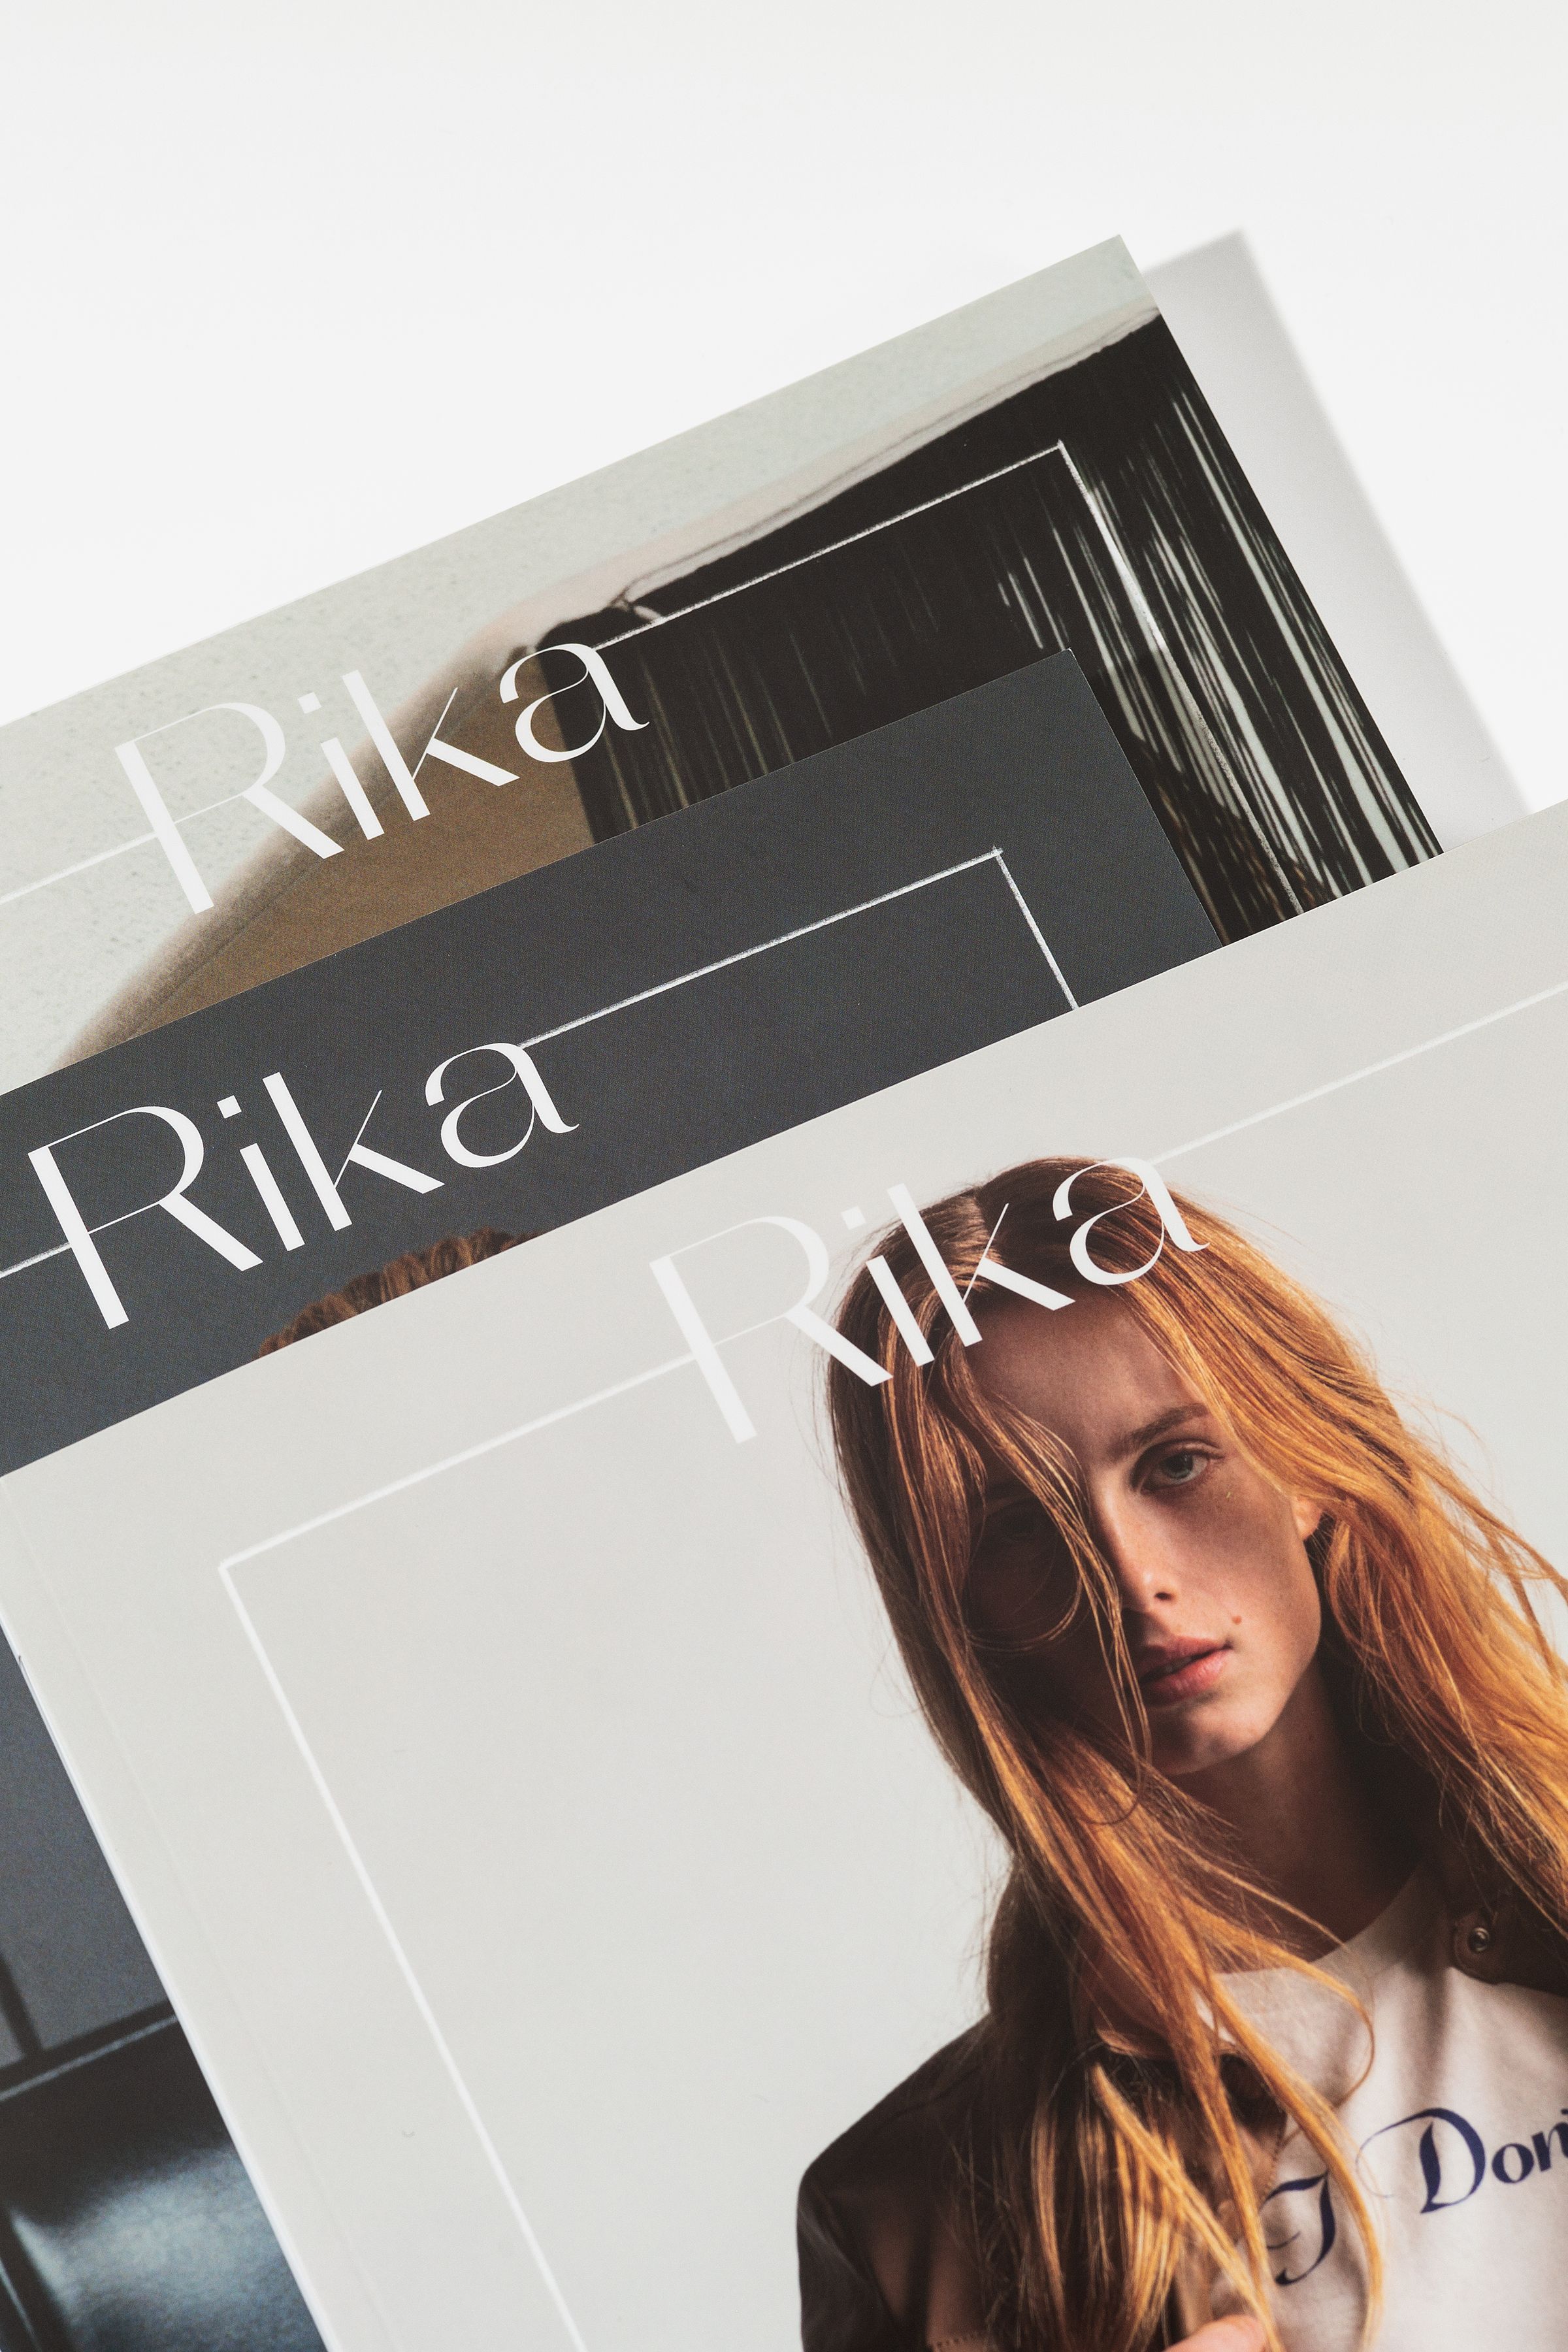 Rika Magazine issue no. 20 covers